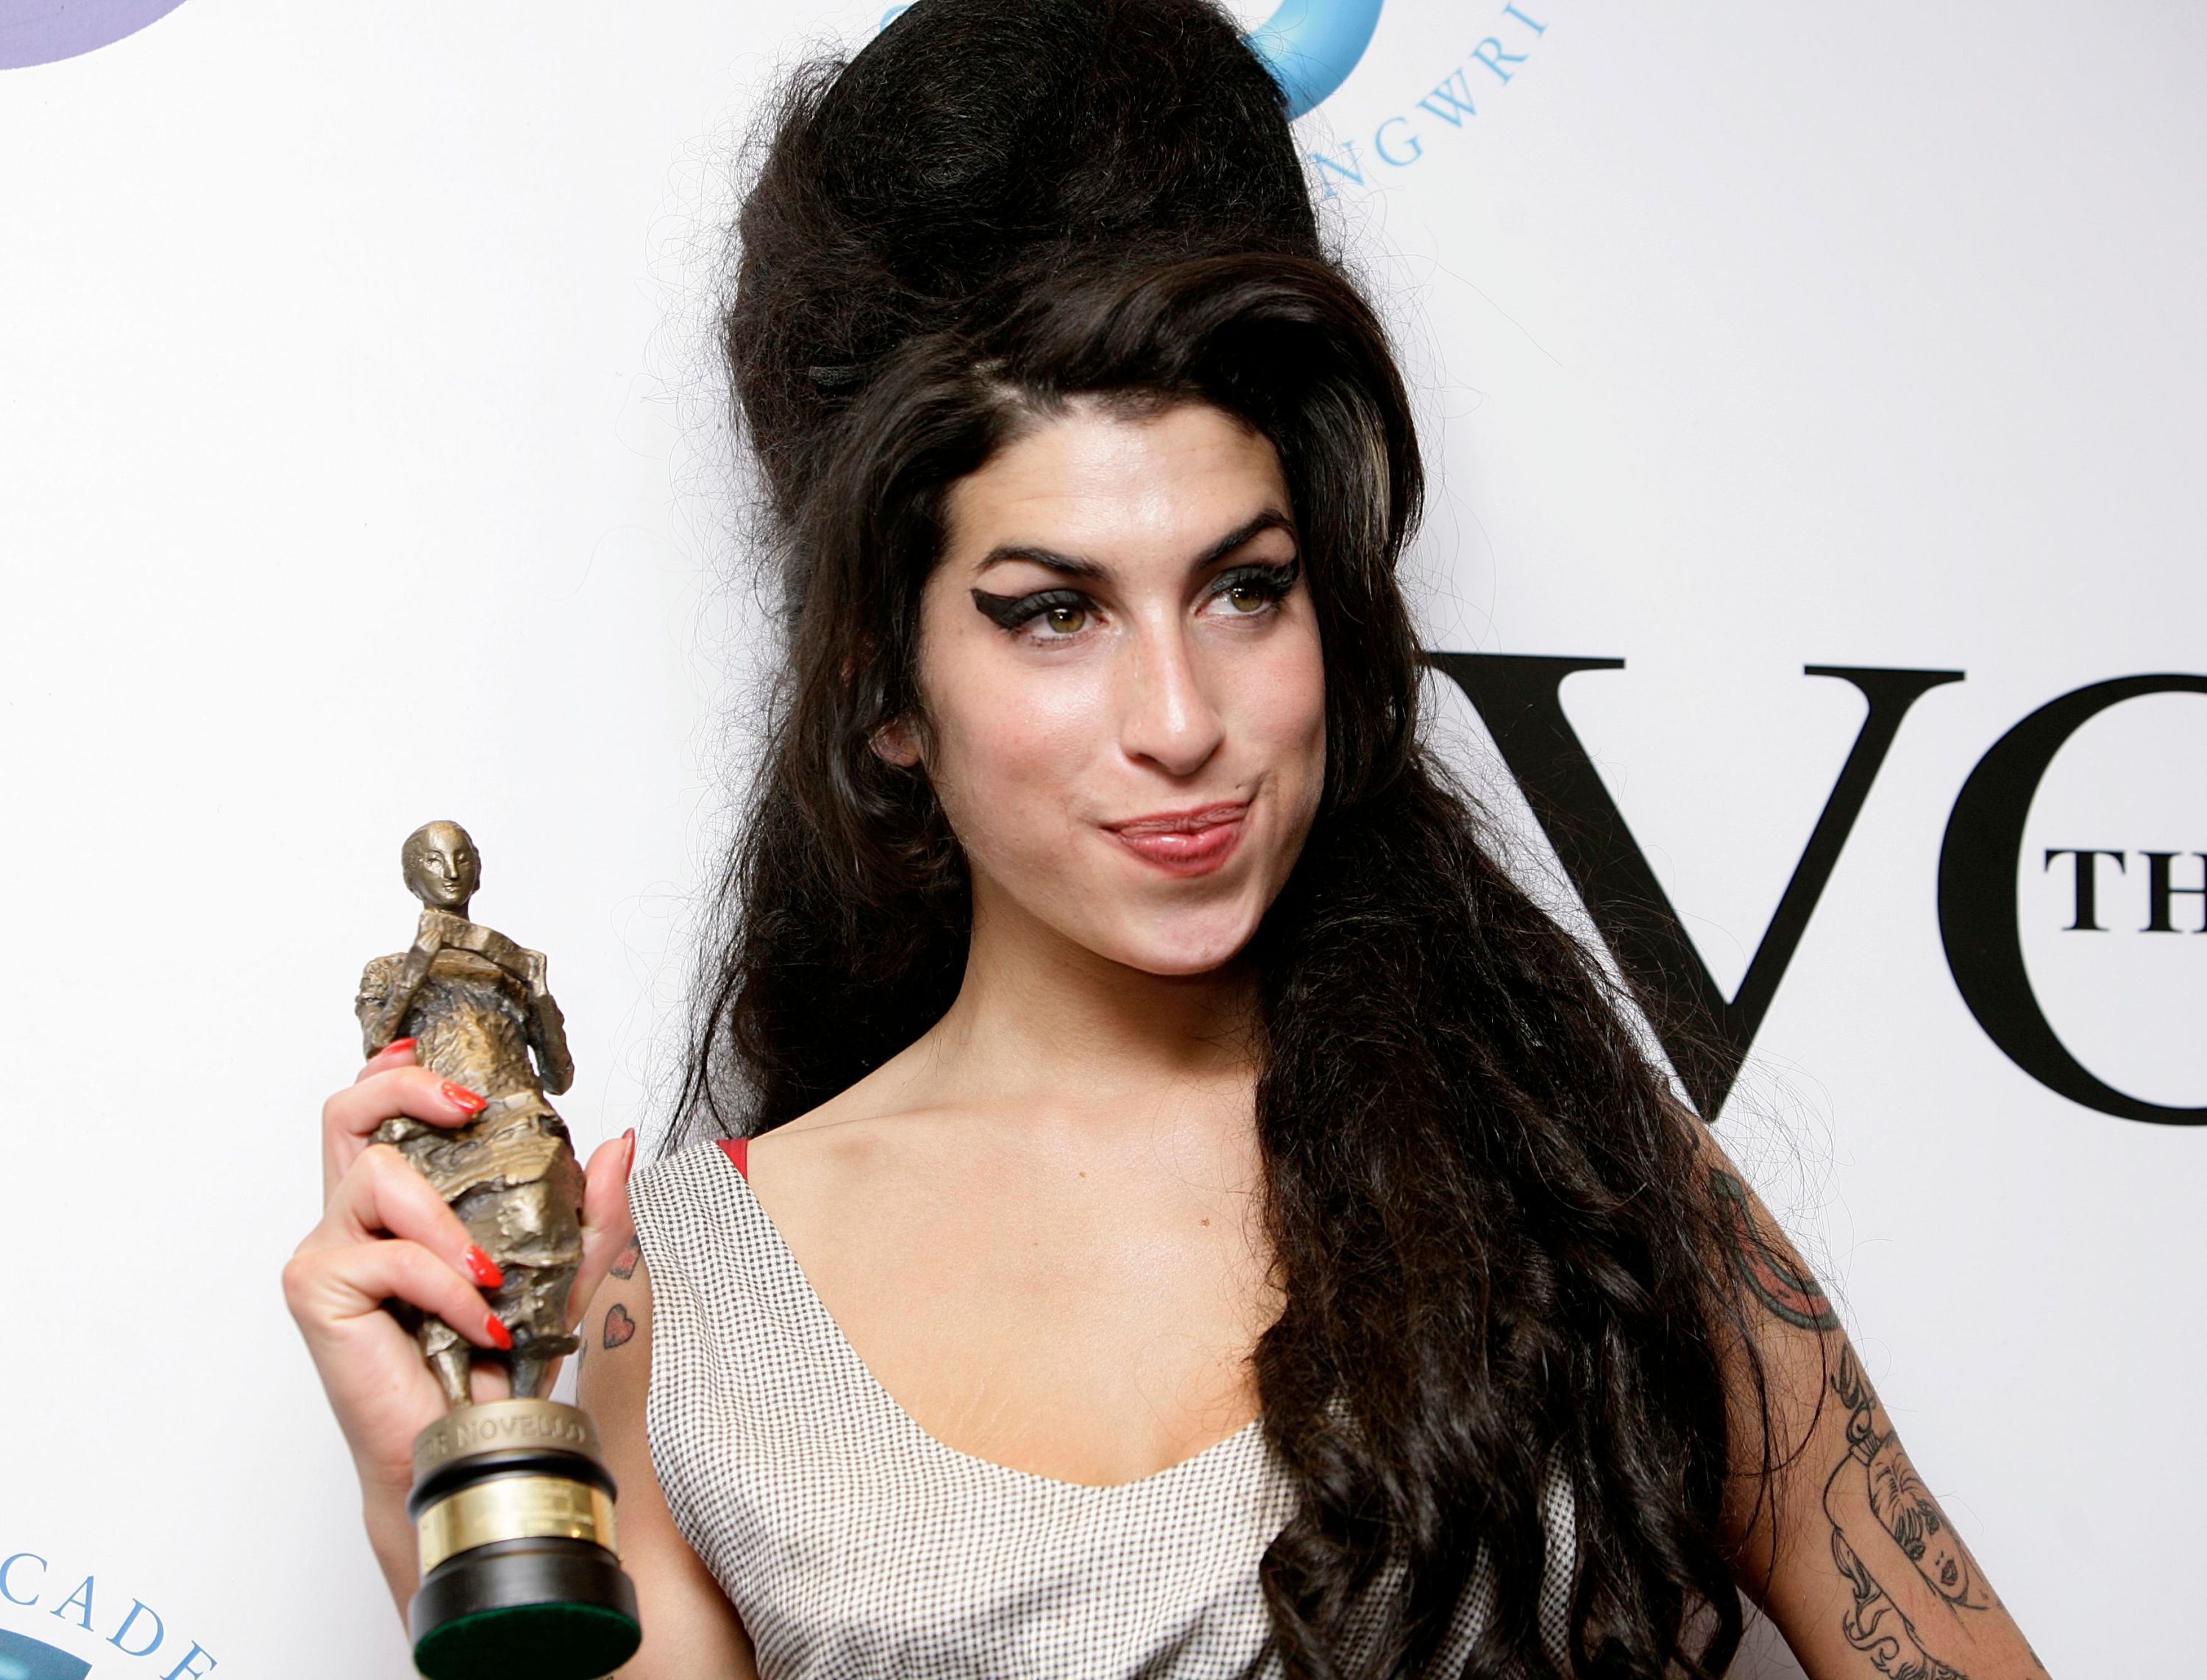 Amy Winehouse death. RETRANSMISSION: Amends years since her death to 10 in caption. File photo dated 24/05/07 of Amy Winehouse after winning the Best Contemporary song award for her song 'Rehab' at the Ivor Novello Awards, at the Grosvenor House Hotel in cental London. Fans will mark 10 years since her death on Friday. Issue date: Friday July 23, 2021. The singer, best known for songs including Back To Black and Rehab, died of alcohol poisoning at the age of 27 at her home in Camden, north London, on July 23 2011. See PA story ANNIVERSARY Winehouse. Photo credit should read: Yui Mok/PA Wire URN:61094940 (Press Association via AP Images)